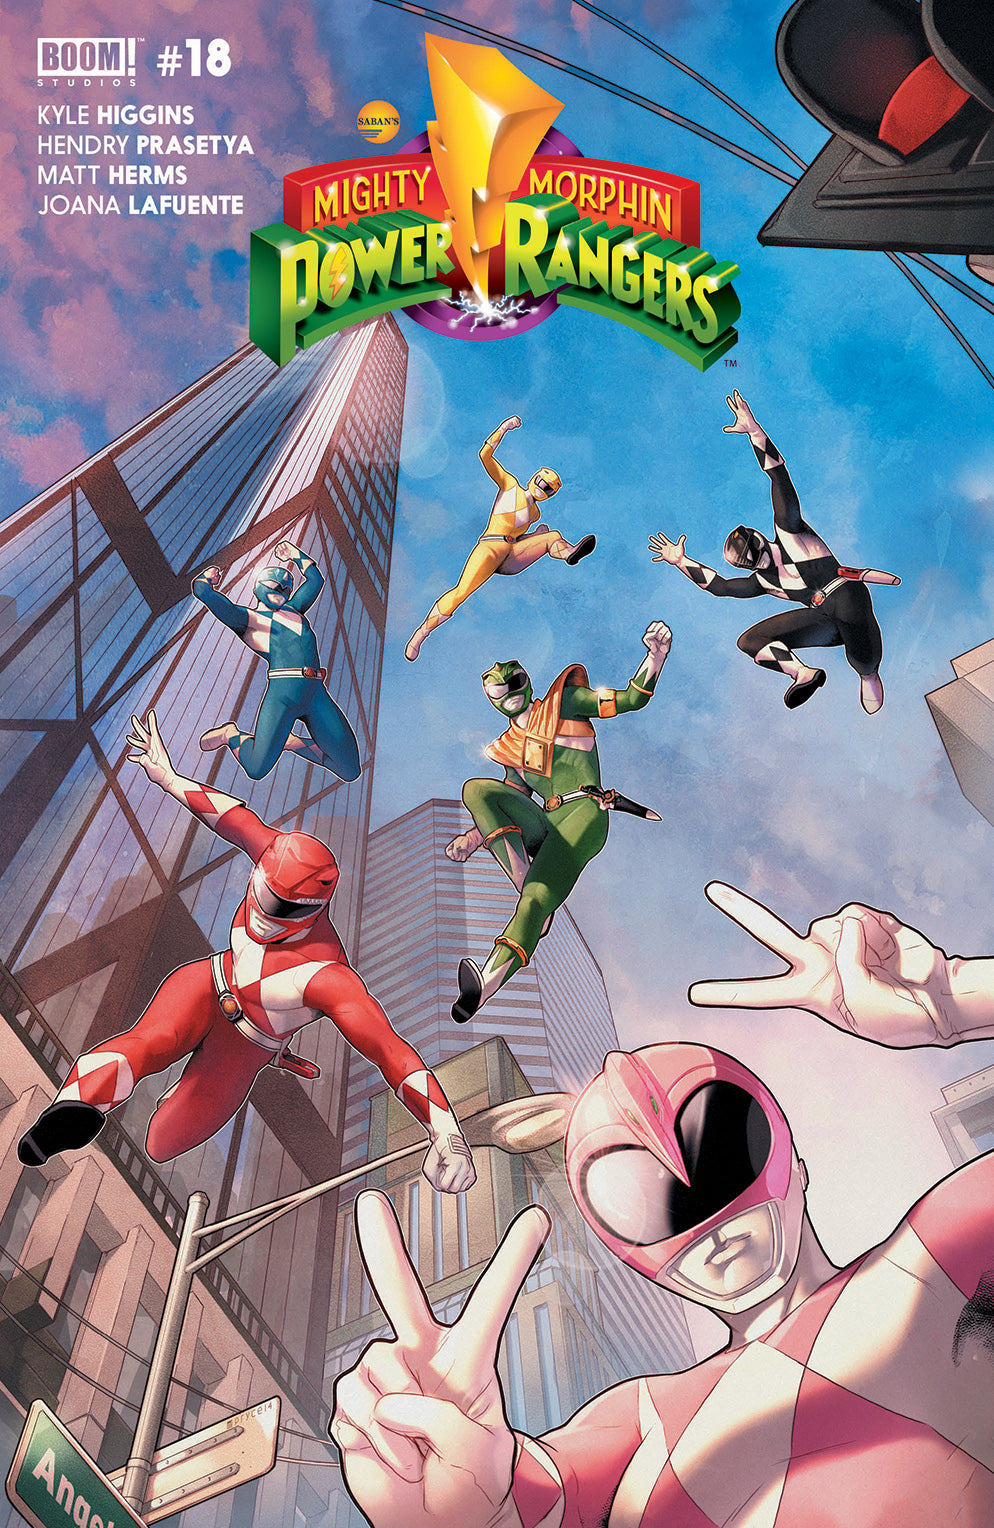 MIGHTY MORPHIN POWER RANGERS #18 | Game Master's Emporium (The New GME)